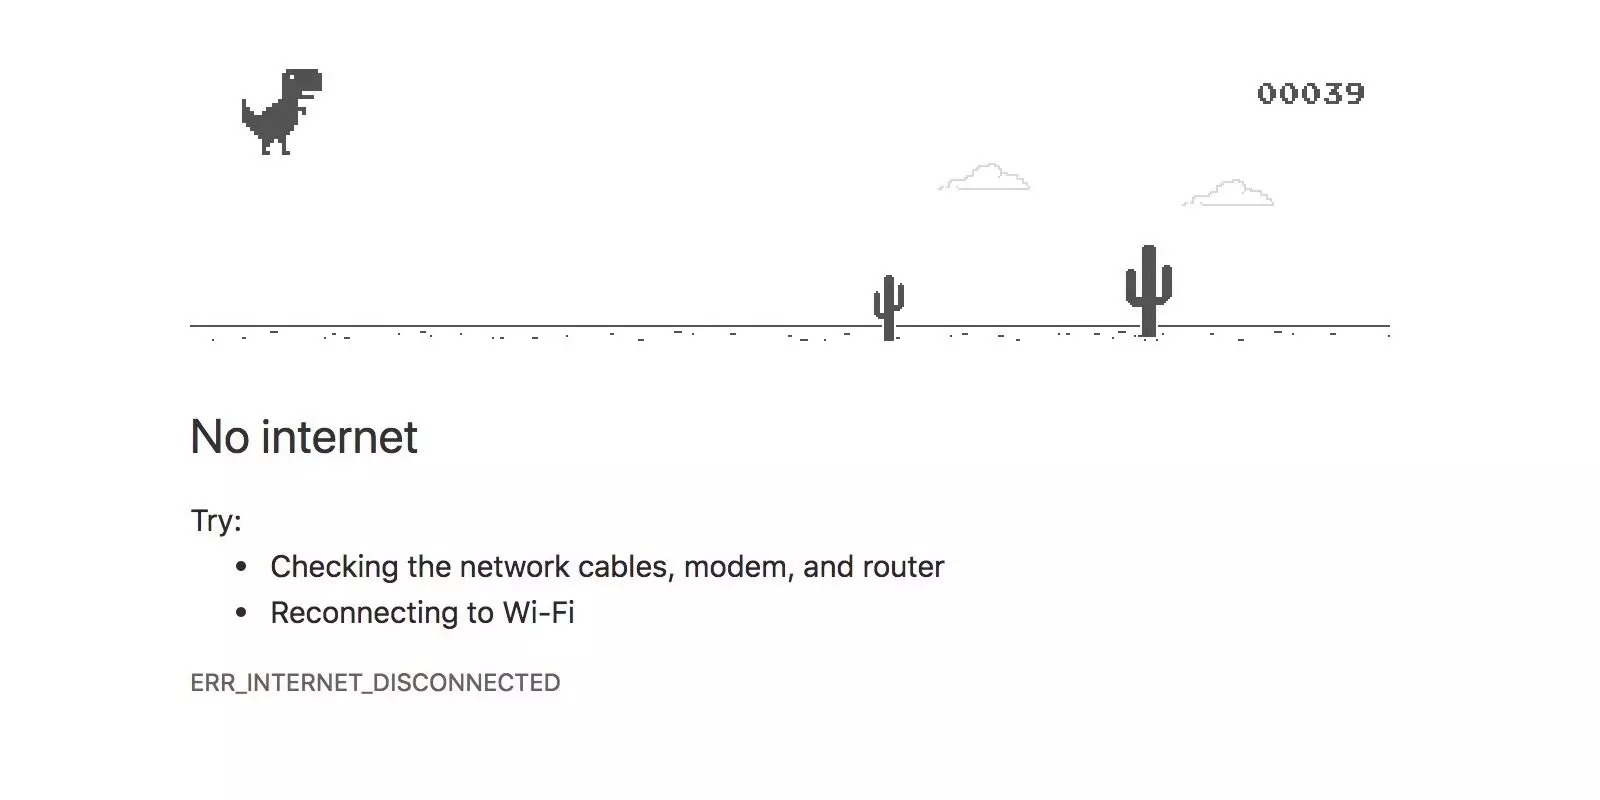 Did you know the Google Chrome no internet dinosaur is a game?